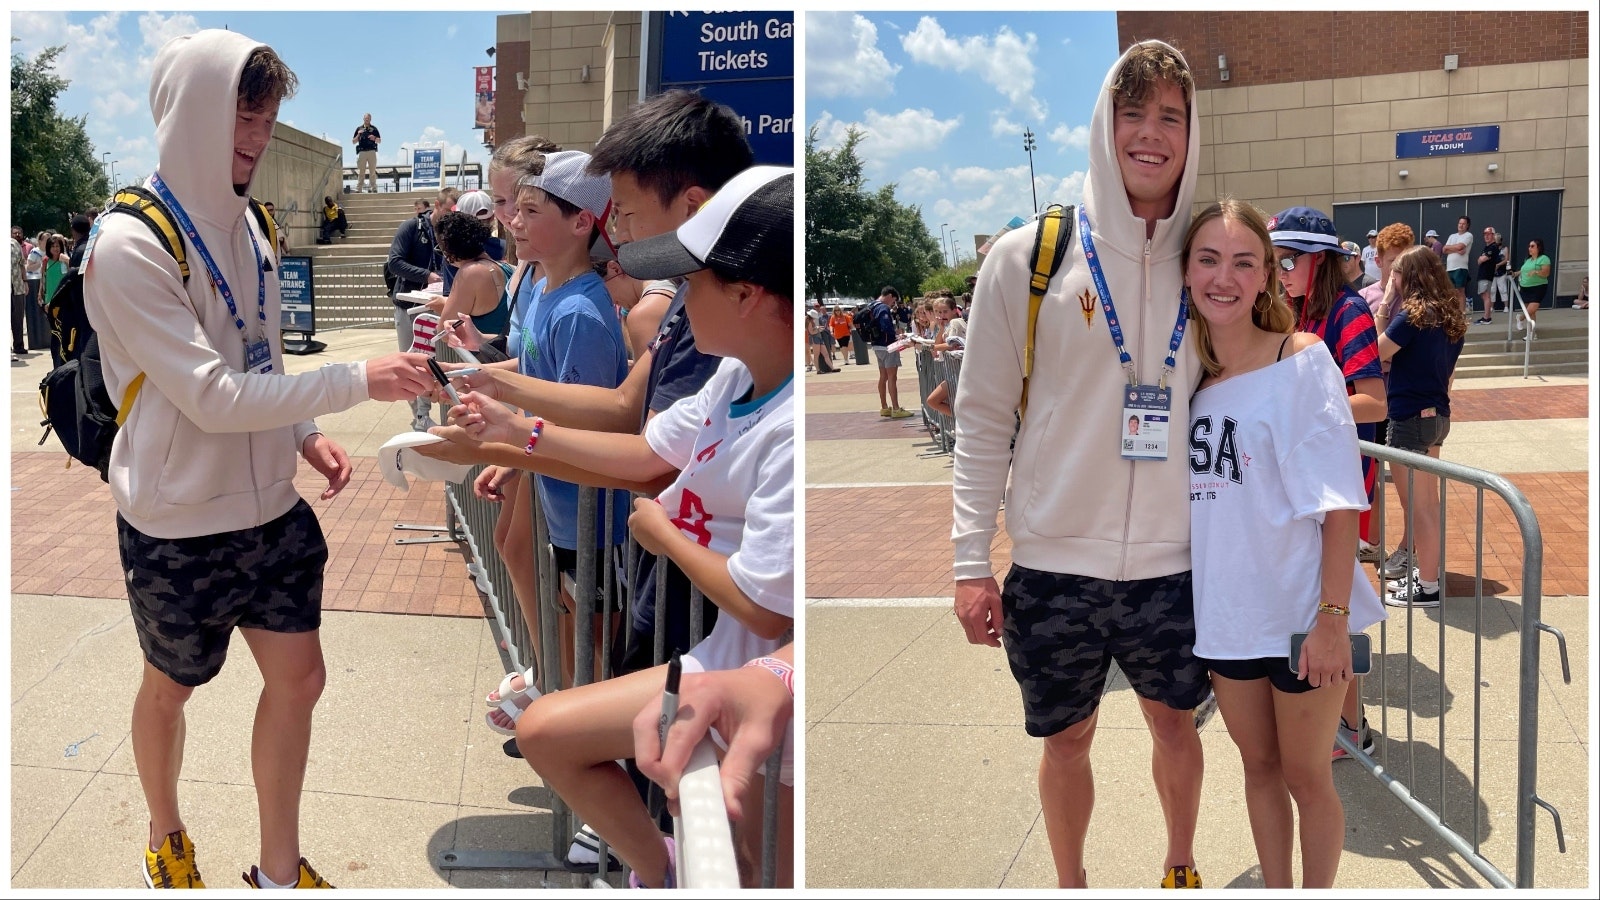 Jonny Kulow poses for pictures and signs autographs for fans at the U.S. Olympic Swim Trials.